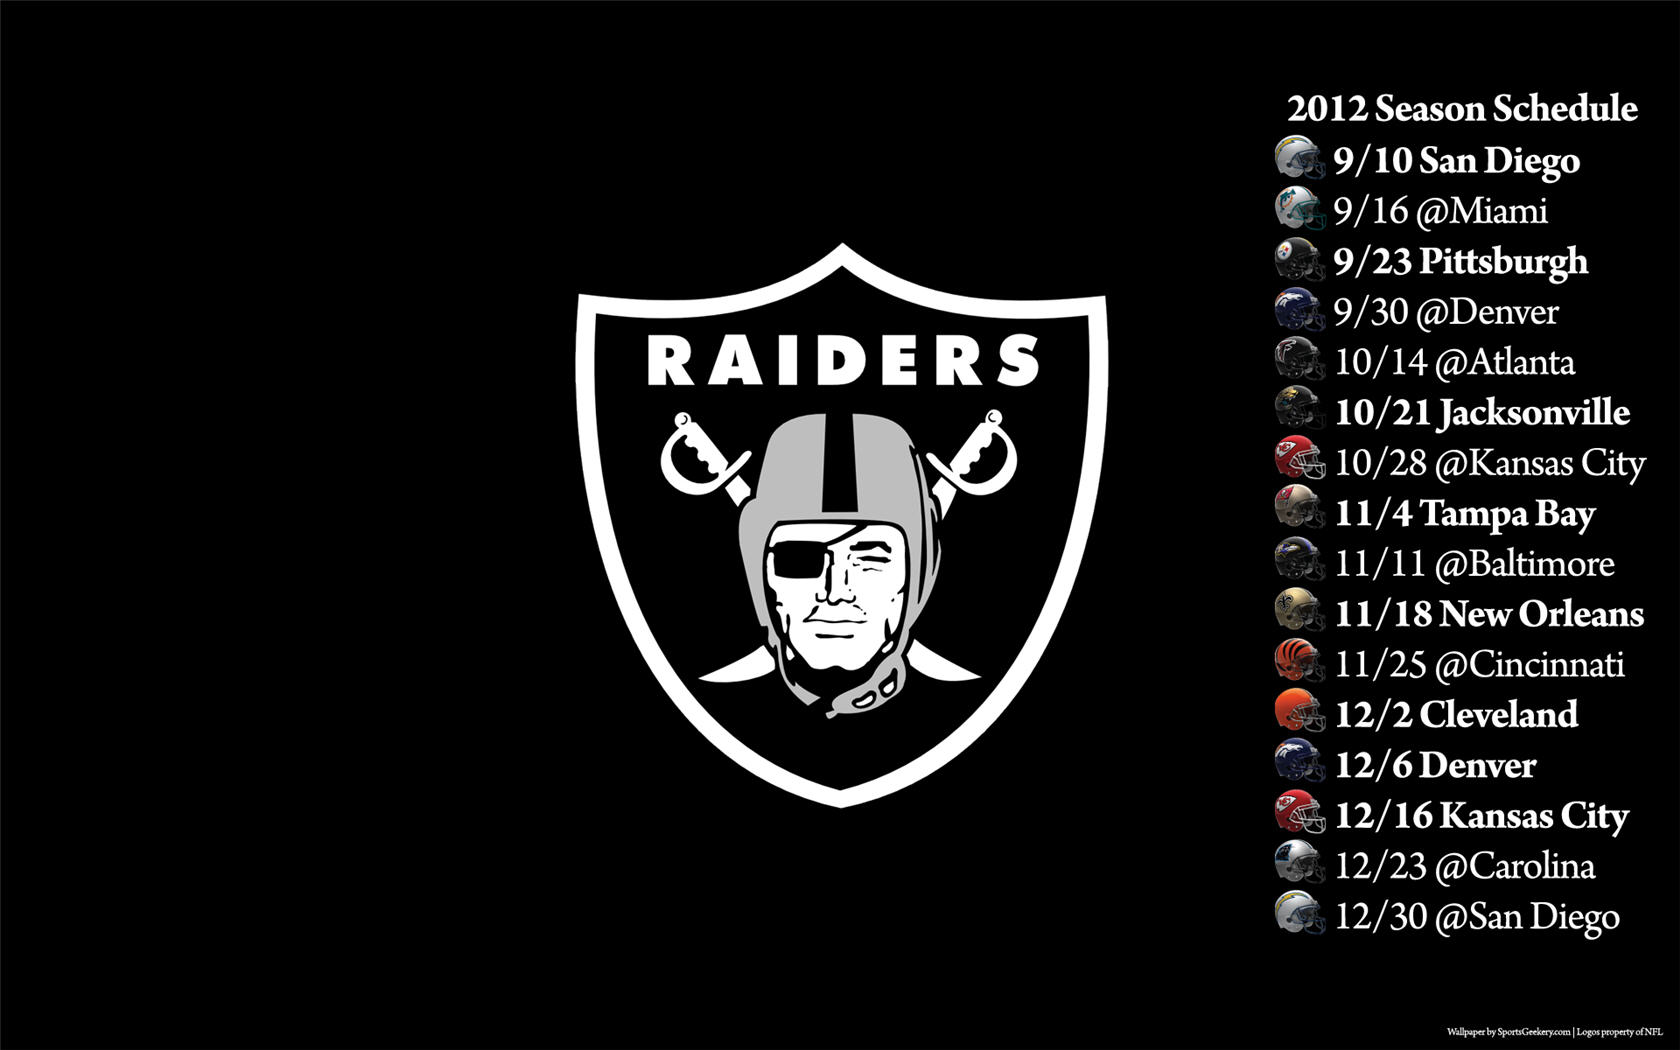 Hope You Like This Oakland Raiders Wallpaper HD Background As Much